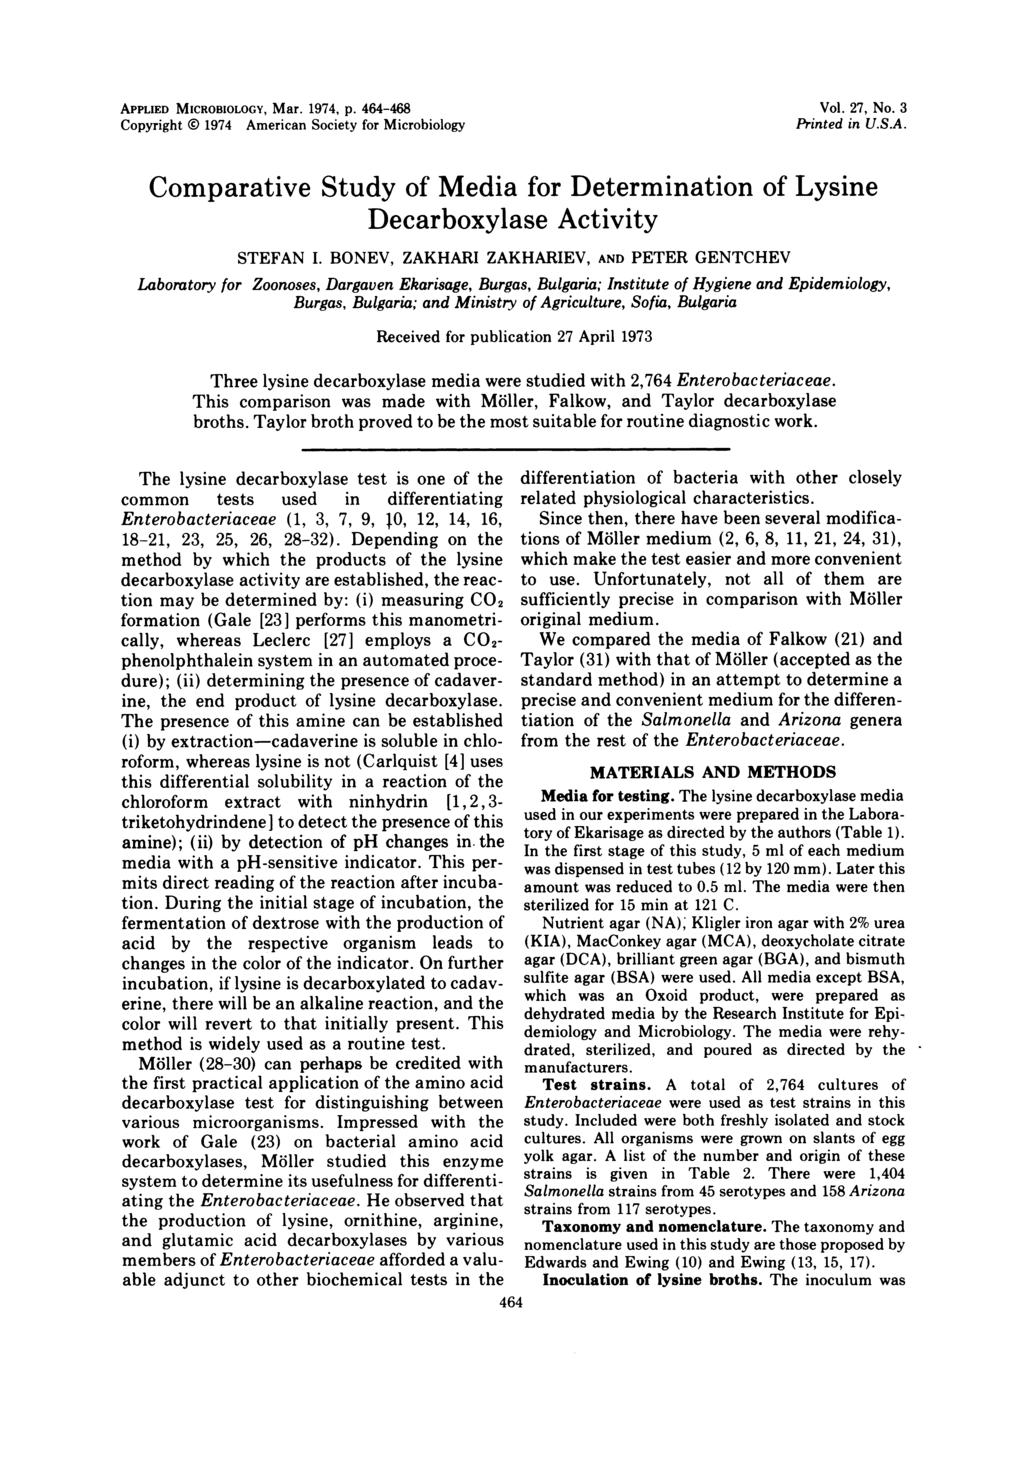 APPLIED MICROBIOLOGY, Mar. 1974, p. 464-468 Copyright 0 1974 American Society for Microbiology Vol. 27, No. 3 Printed in U.S.A. Comparative Study of Media for Determination of Lysine Decarboxylase Activity STEFAN I.